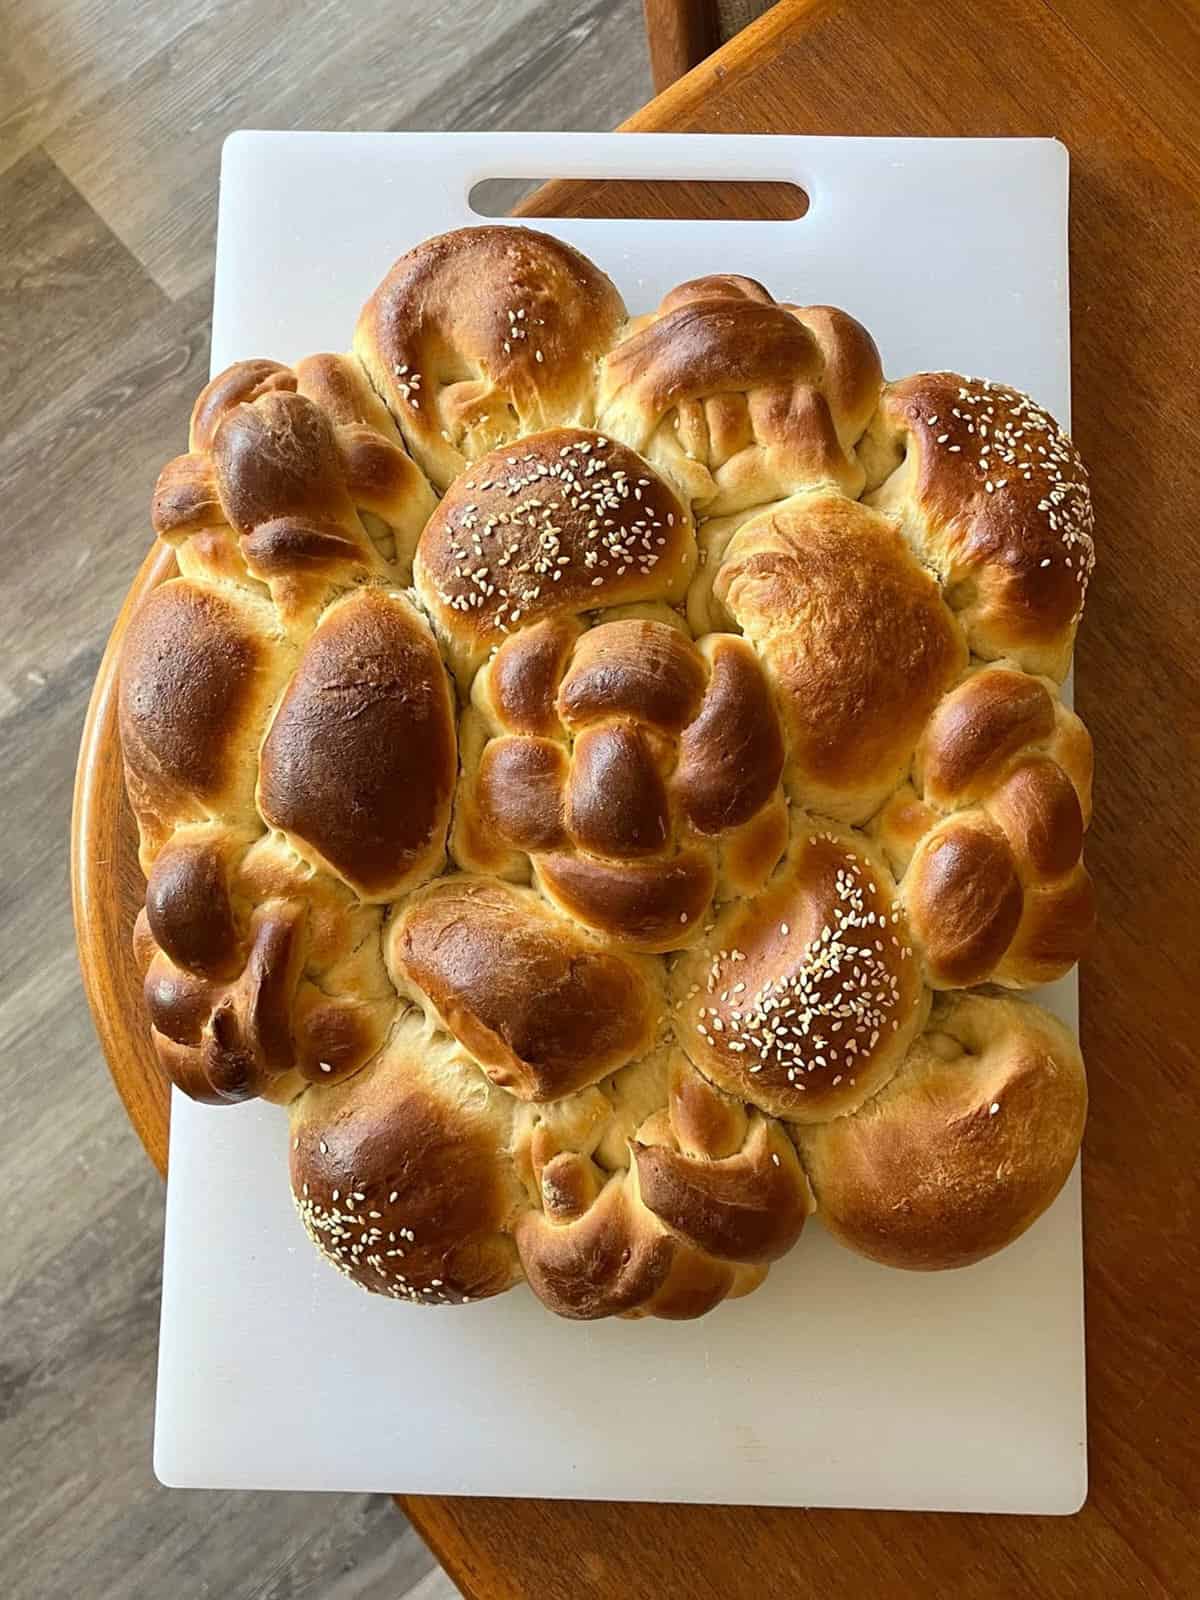 An intricately braided loaf of challah bread.